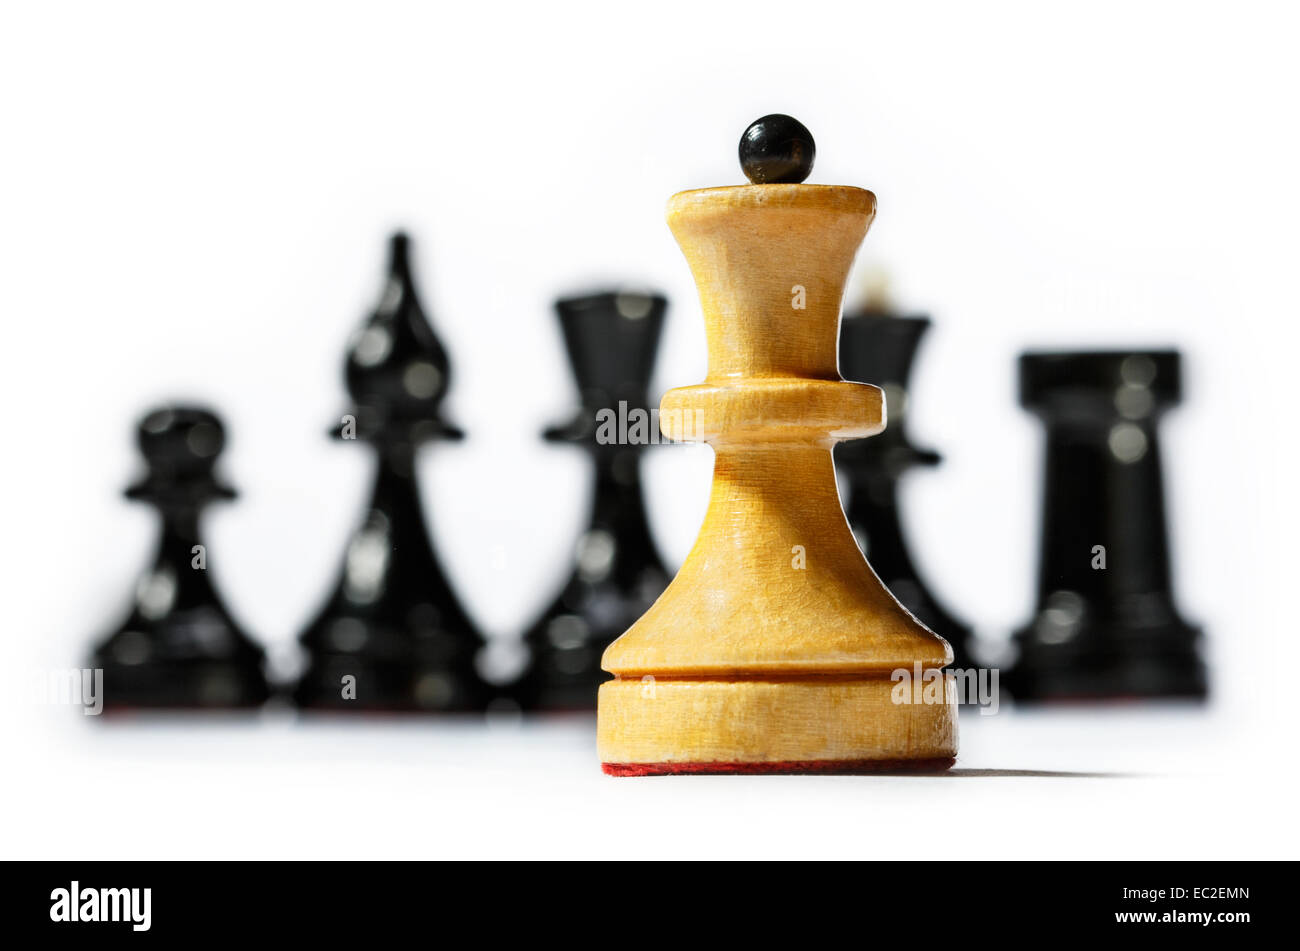 Wooden chessboard with chessmen in toning Stock Photo